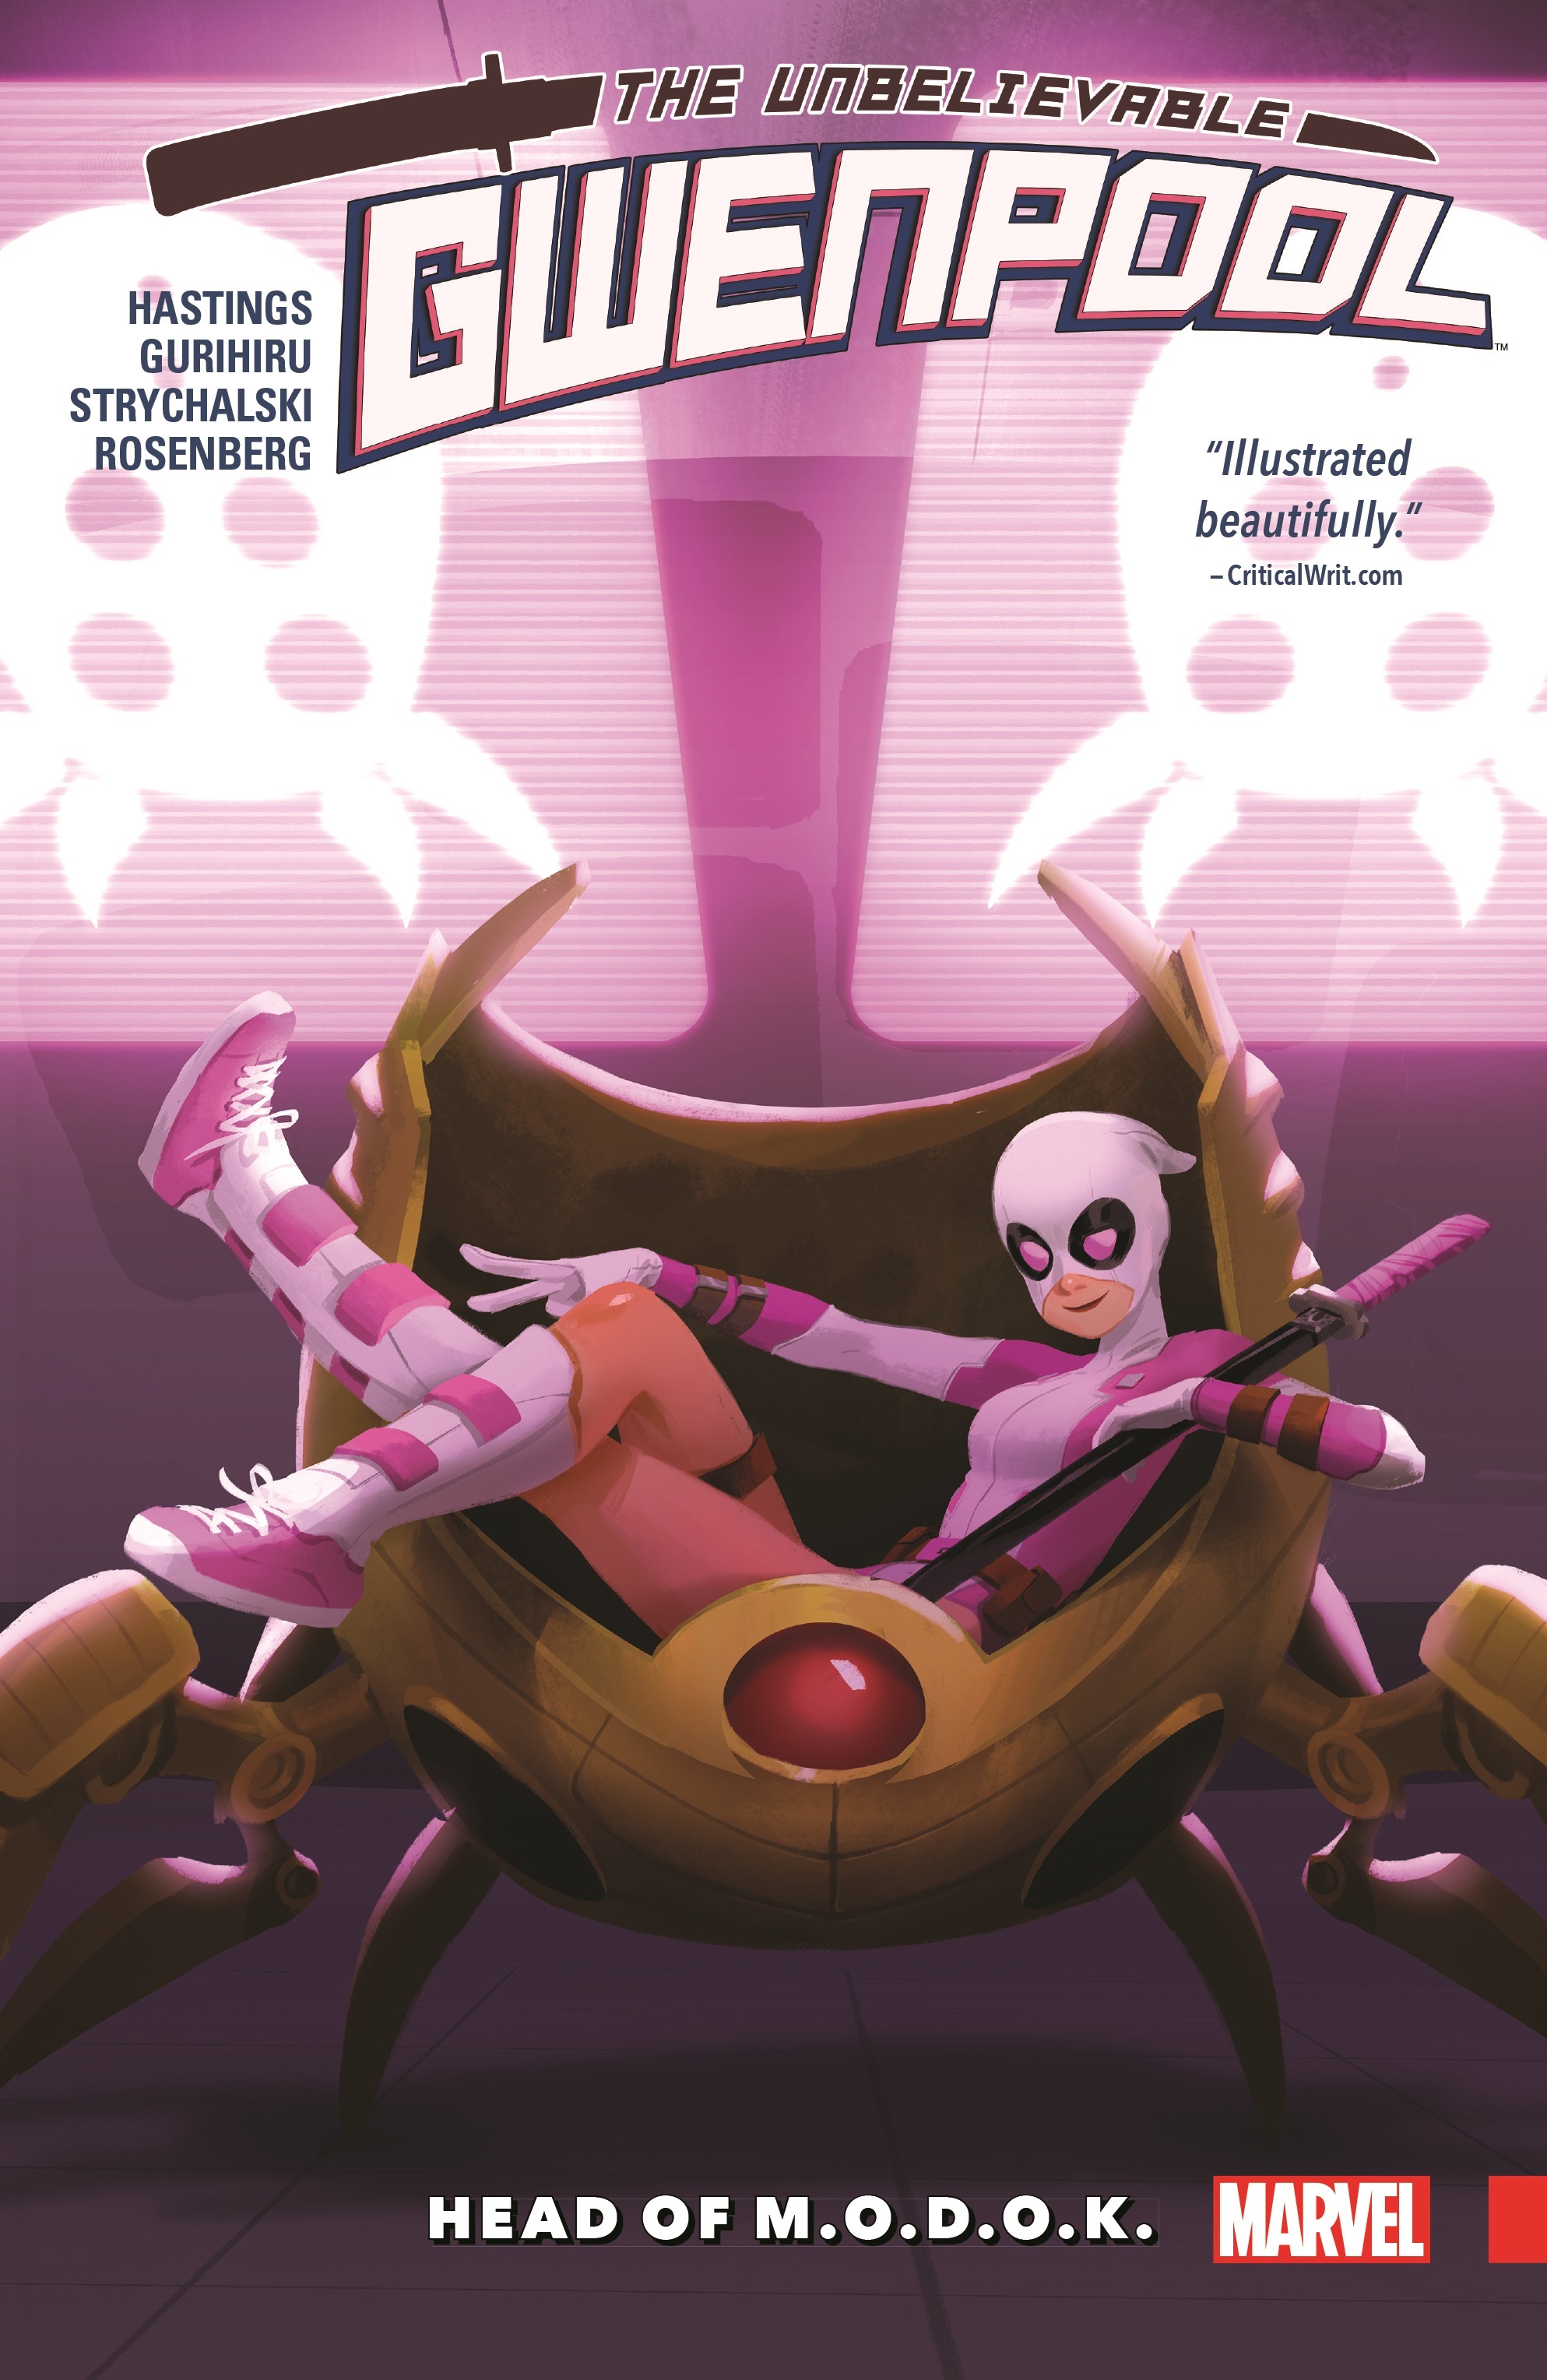 Gwenpool, The Unbelievable Vol. 2: Head of M.O.D.O.K. (Trade Paperback)